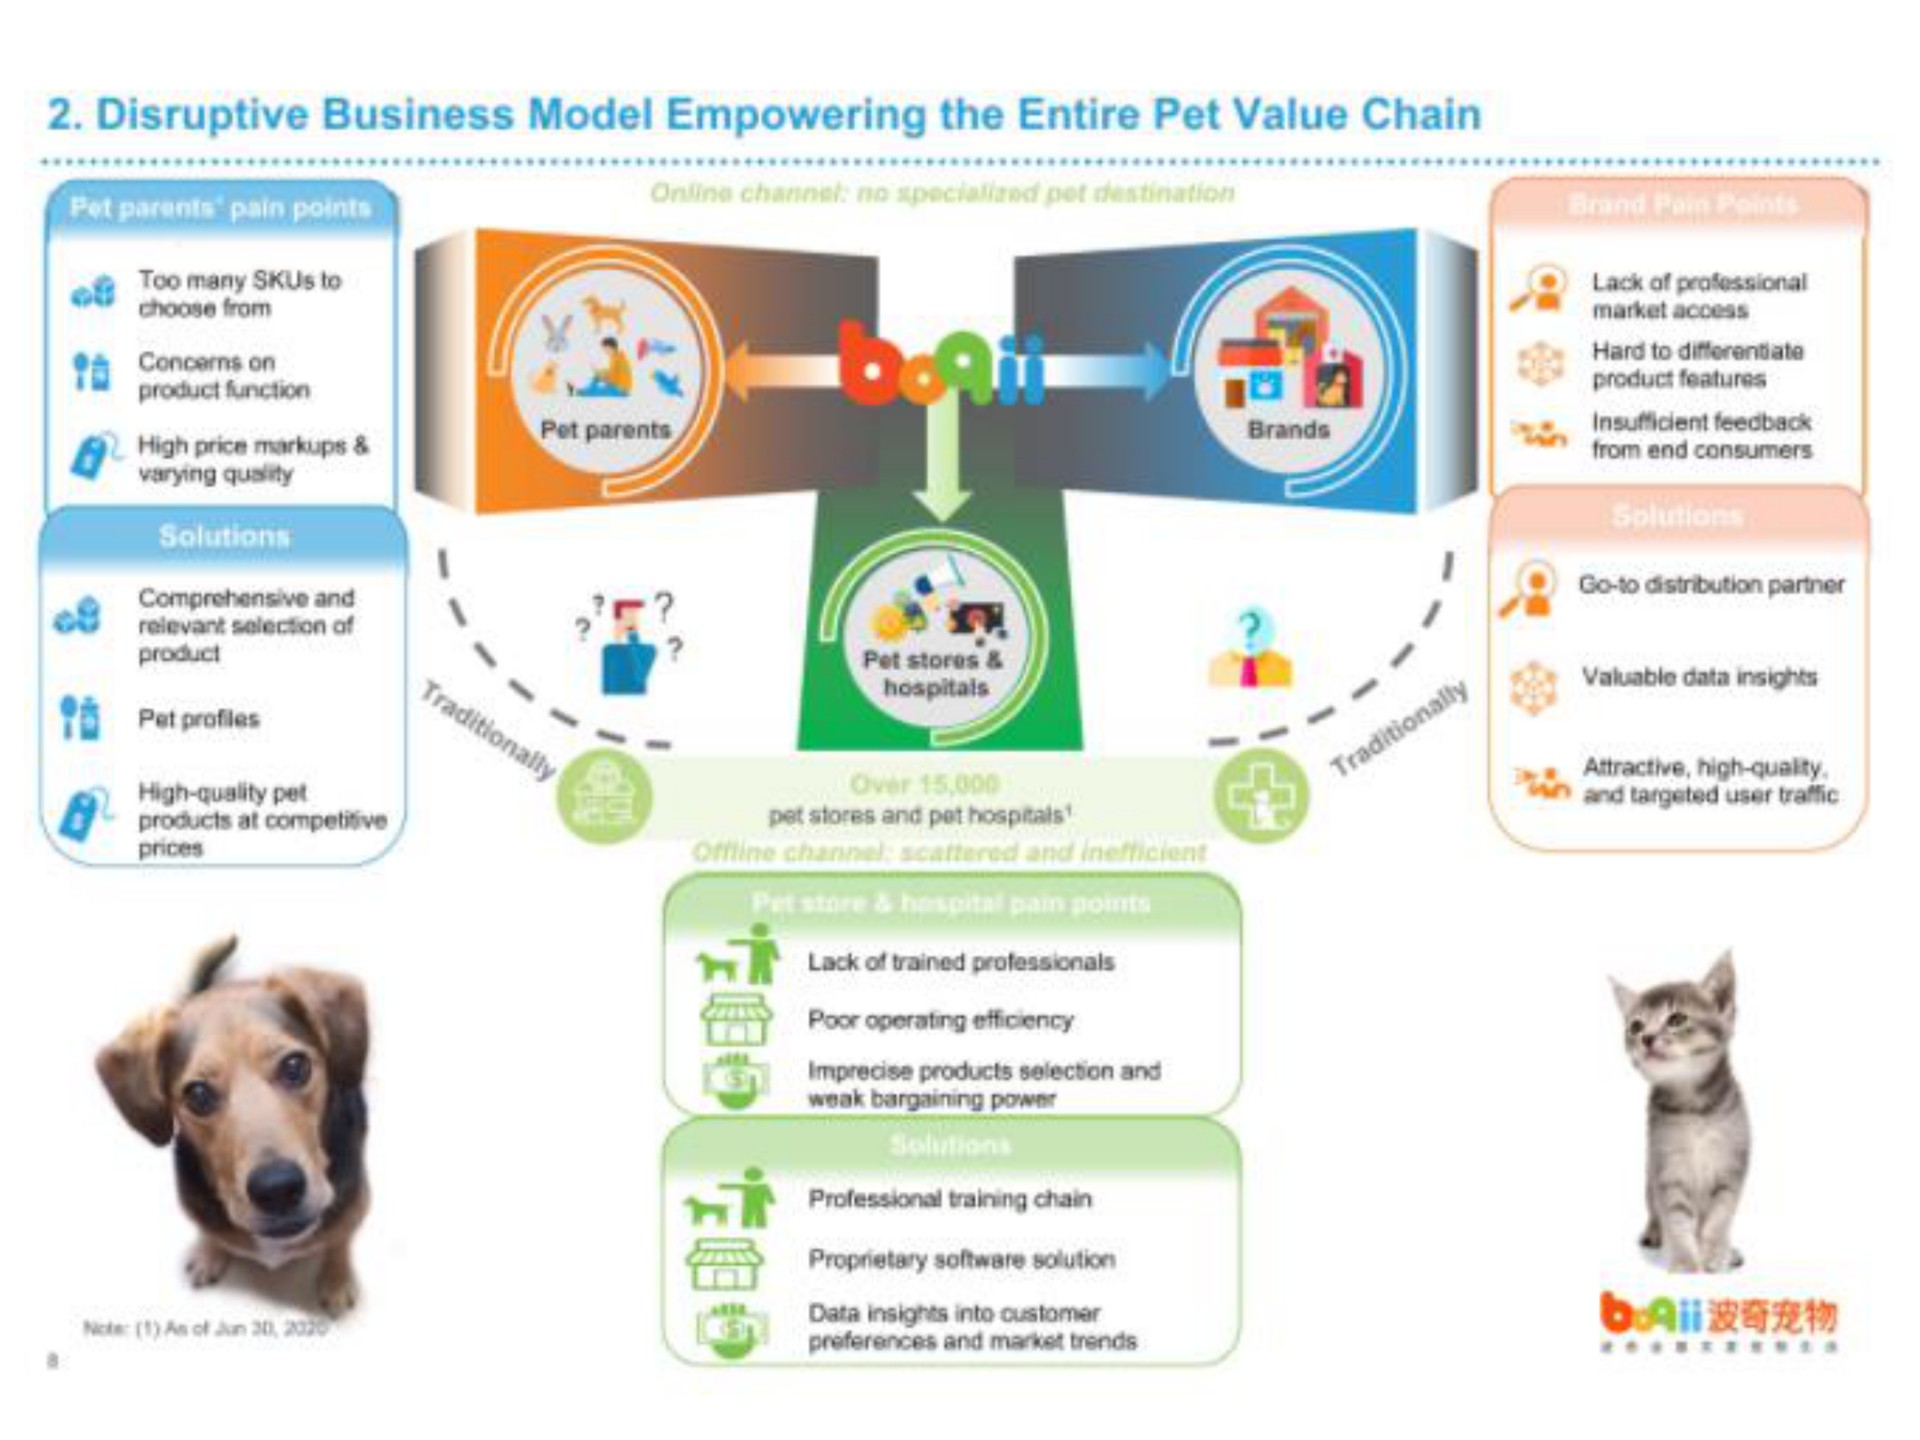 disruptive business model empowering the entire pet value chain attractive high quality and targeted user traffic nete rab | Boqii Holding